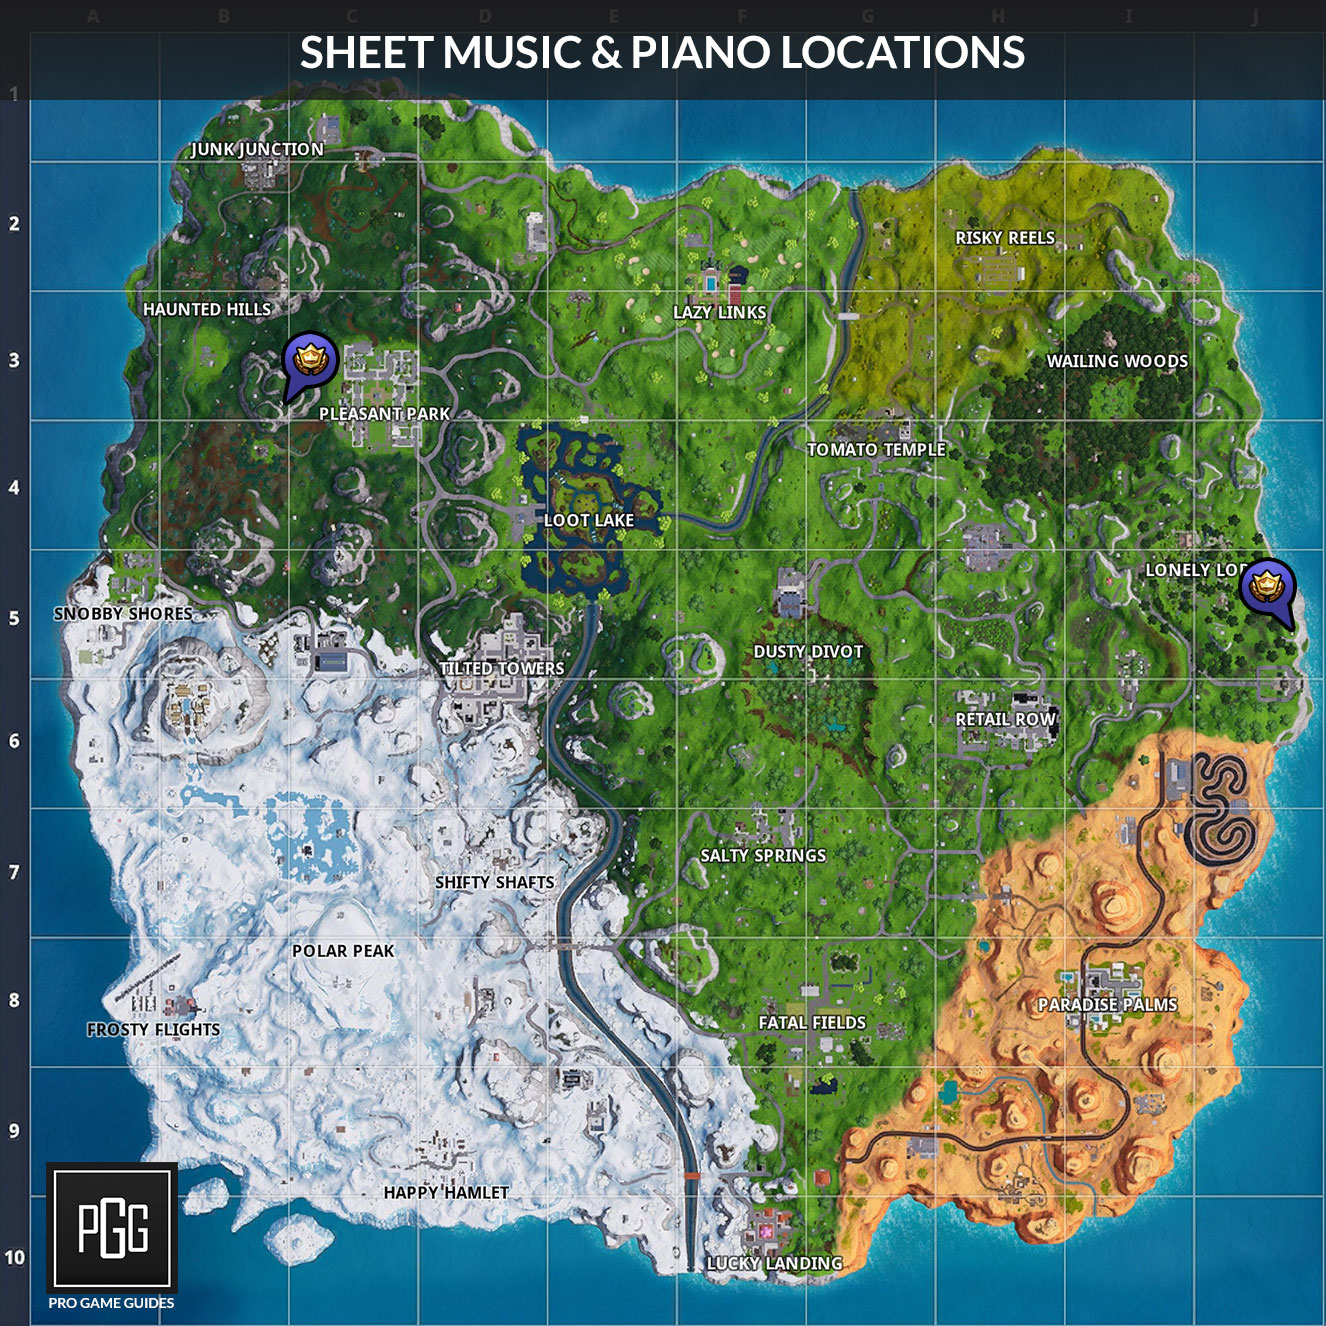 the pleasant park one is way easier than the lonely lodge version to complete the challenge you need to jump on each note as listed on the sheet - fortnite season 8 week 2 challenges cheat sheet